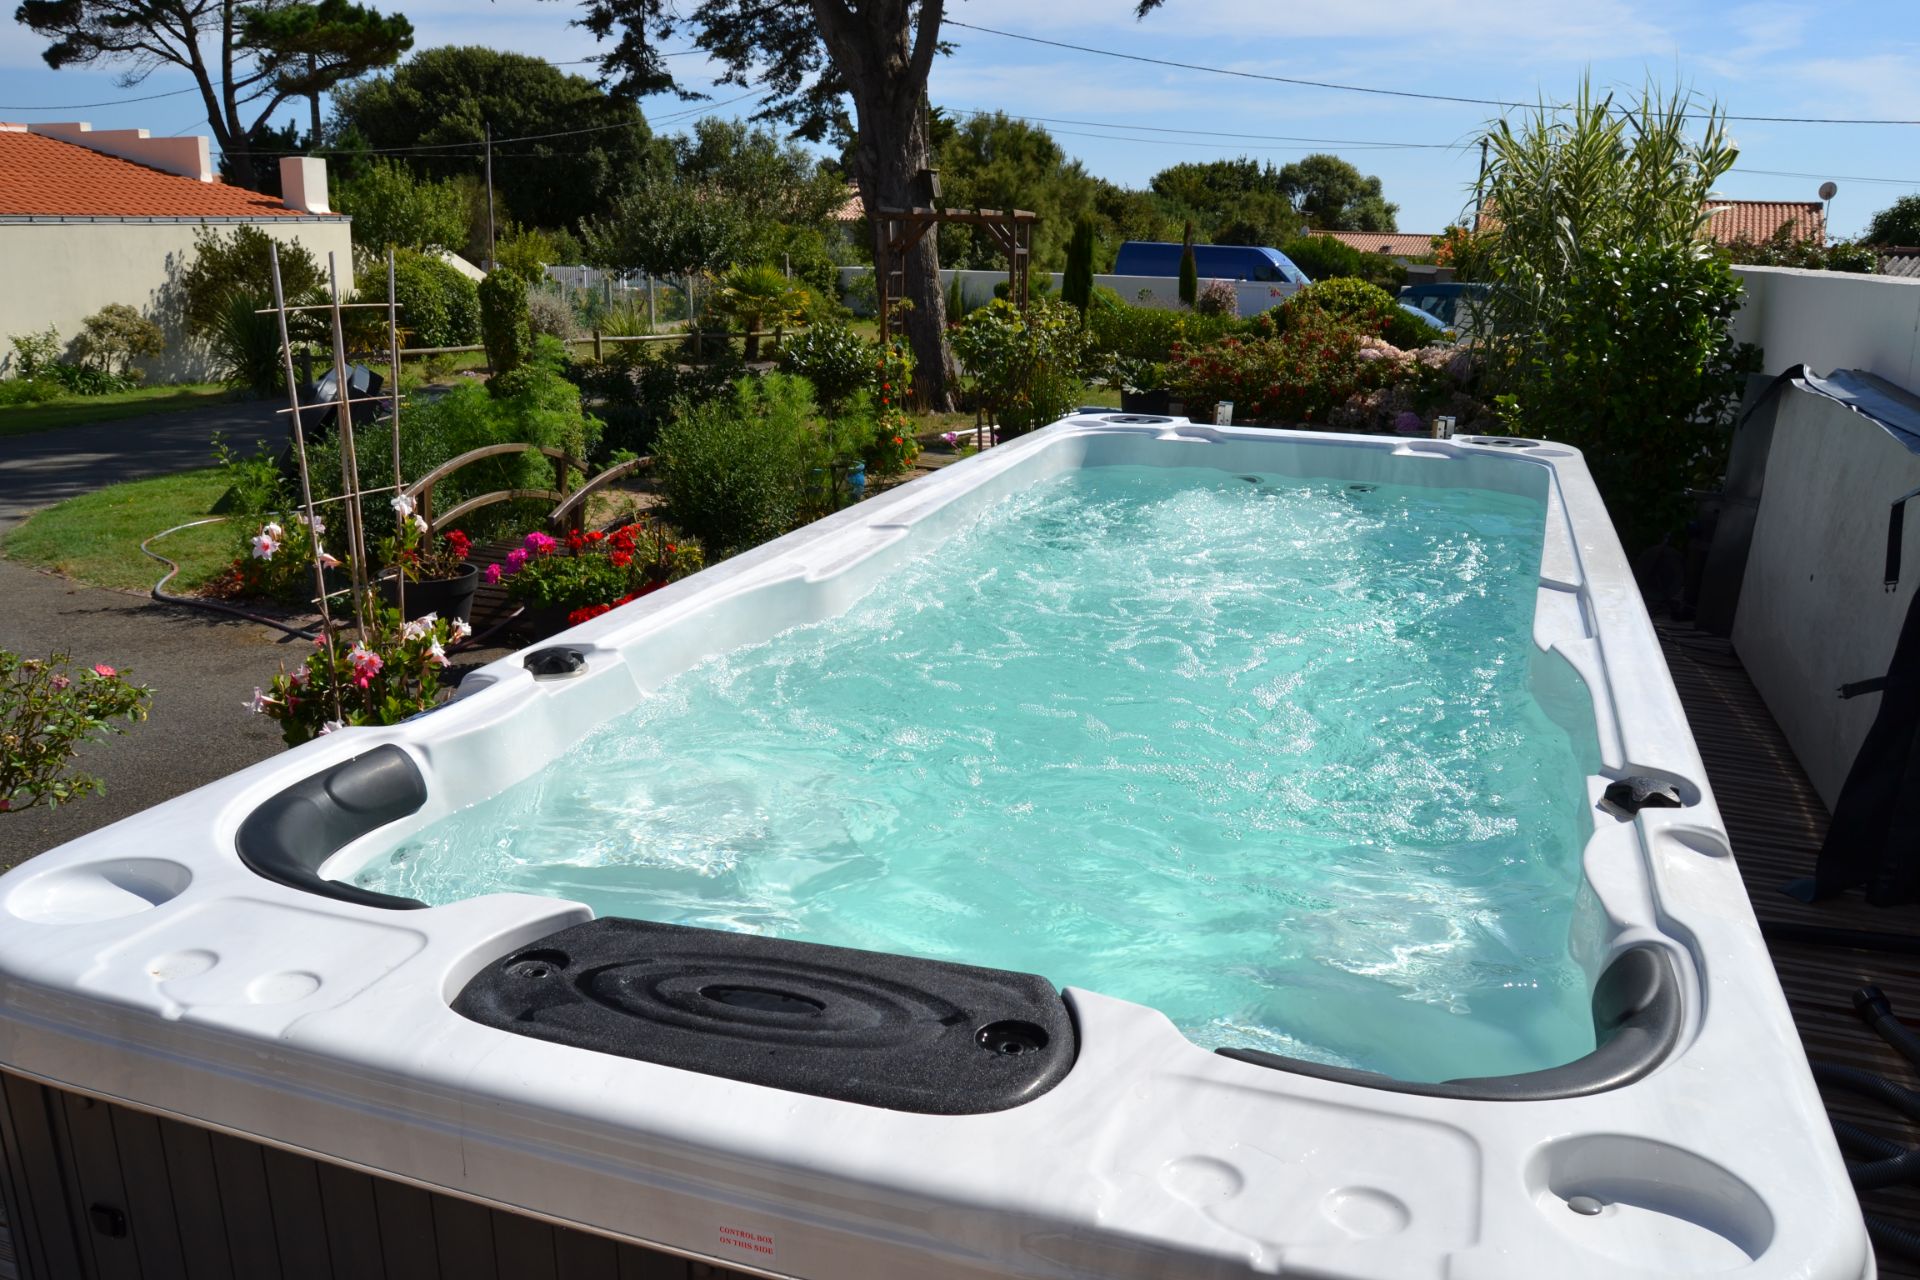 1 x Aquatic 2 Swim Spa - Brand New With Warranty - RRP: £23,499 - CL774 - Location: Nationwide - Image 2 of 4